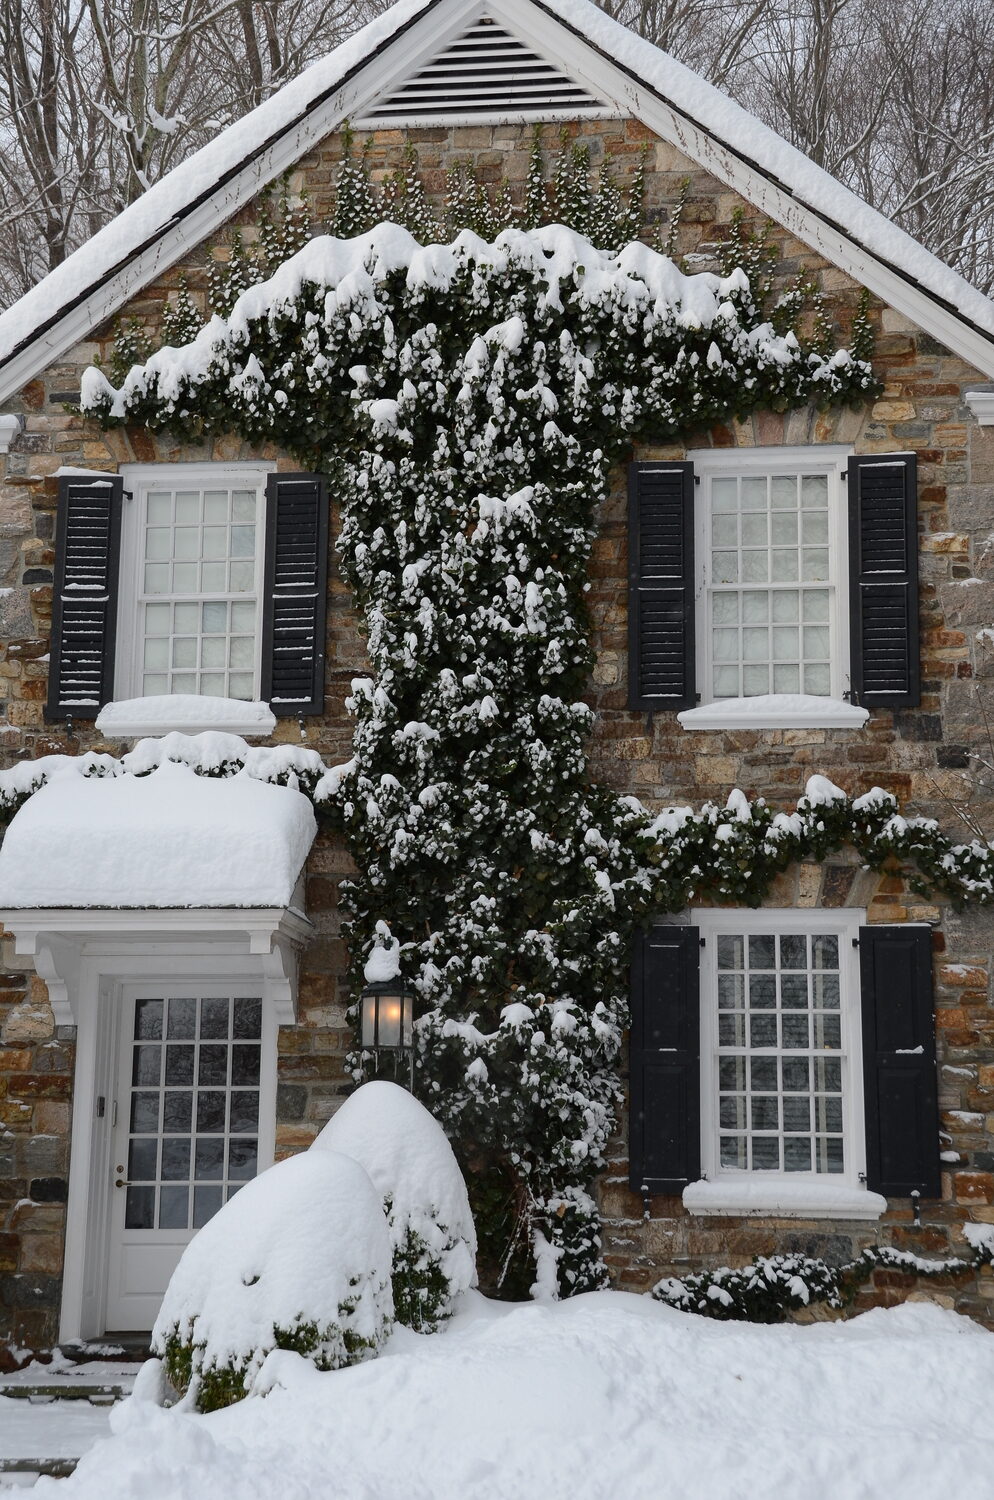 Heavy wet snow can pile up on ivy (center) and rip it off the face of a house resulting in years of lost growth. The boxwood on the lower left can be crushed by snow and ice loads leaving a misshapen and badly damaged shrub that took years to shape and maintain.  ANDREW MESSINGER